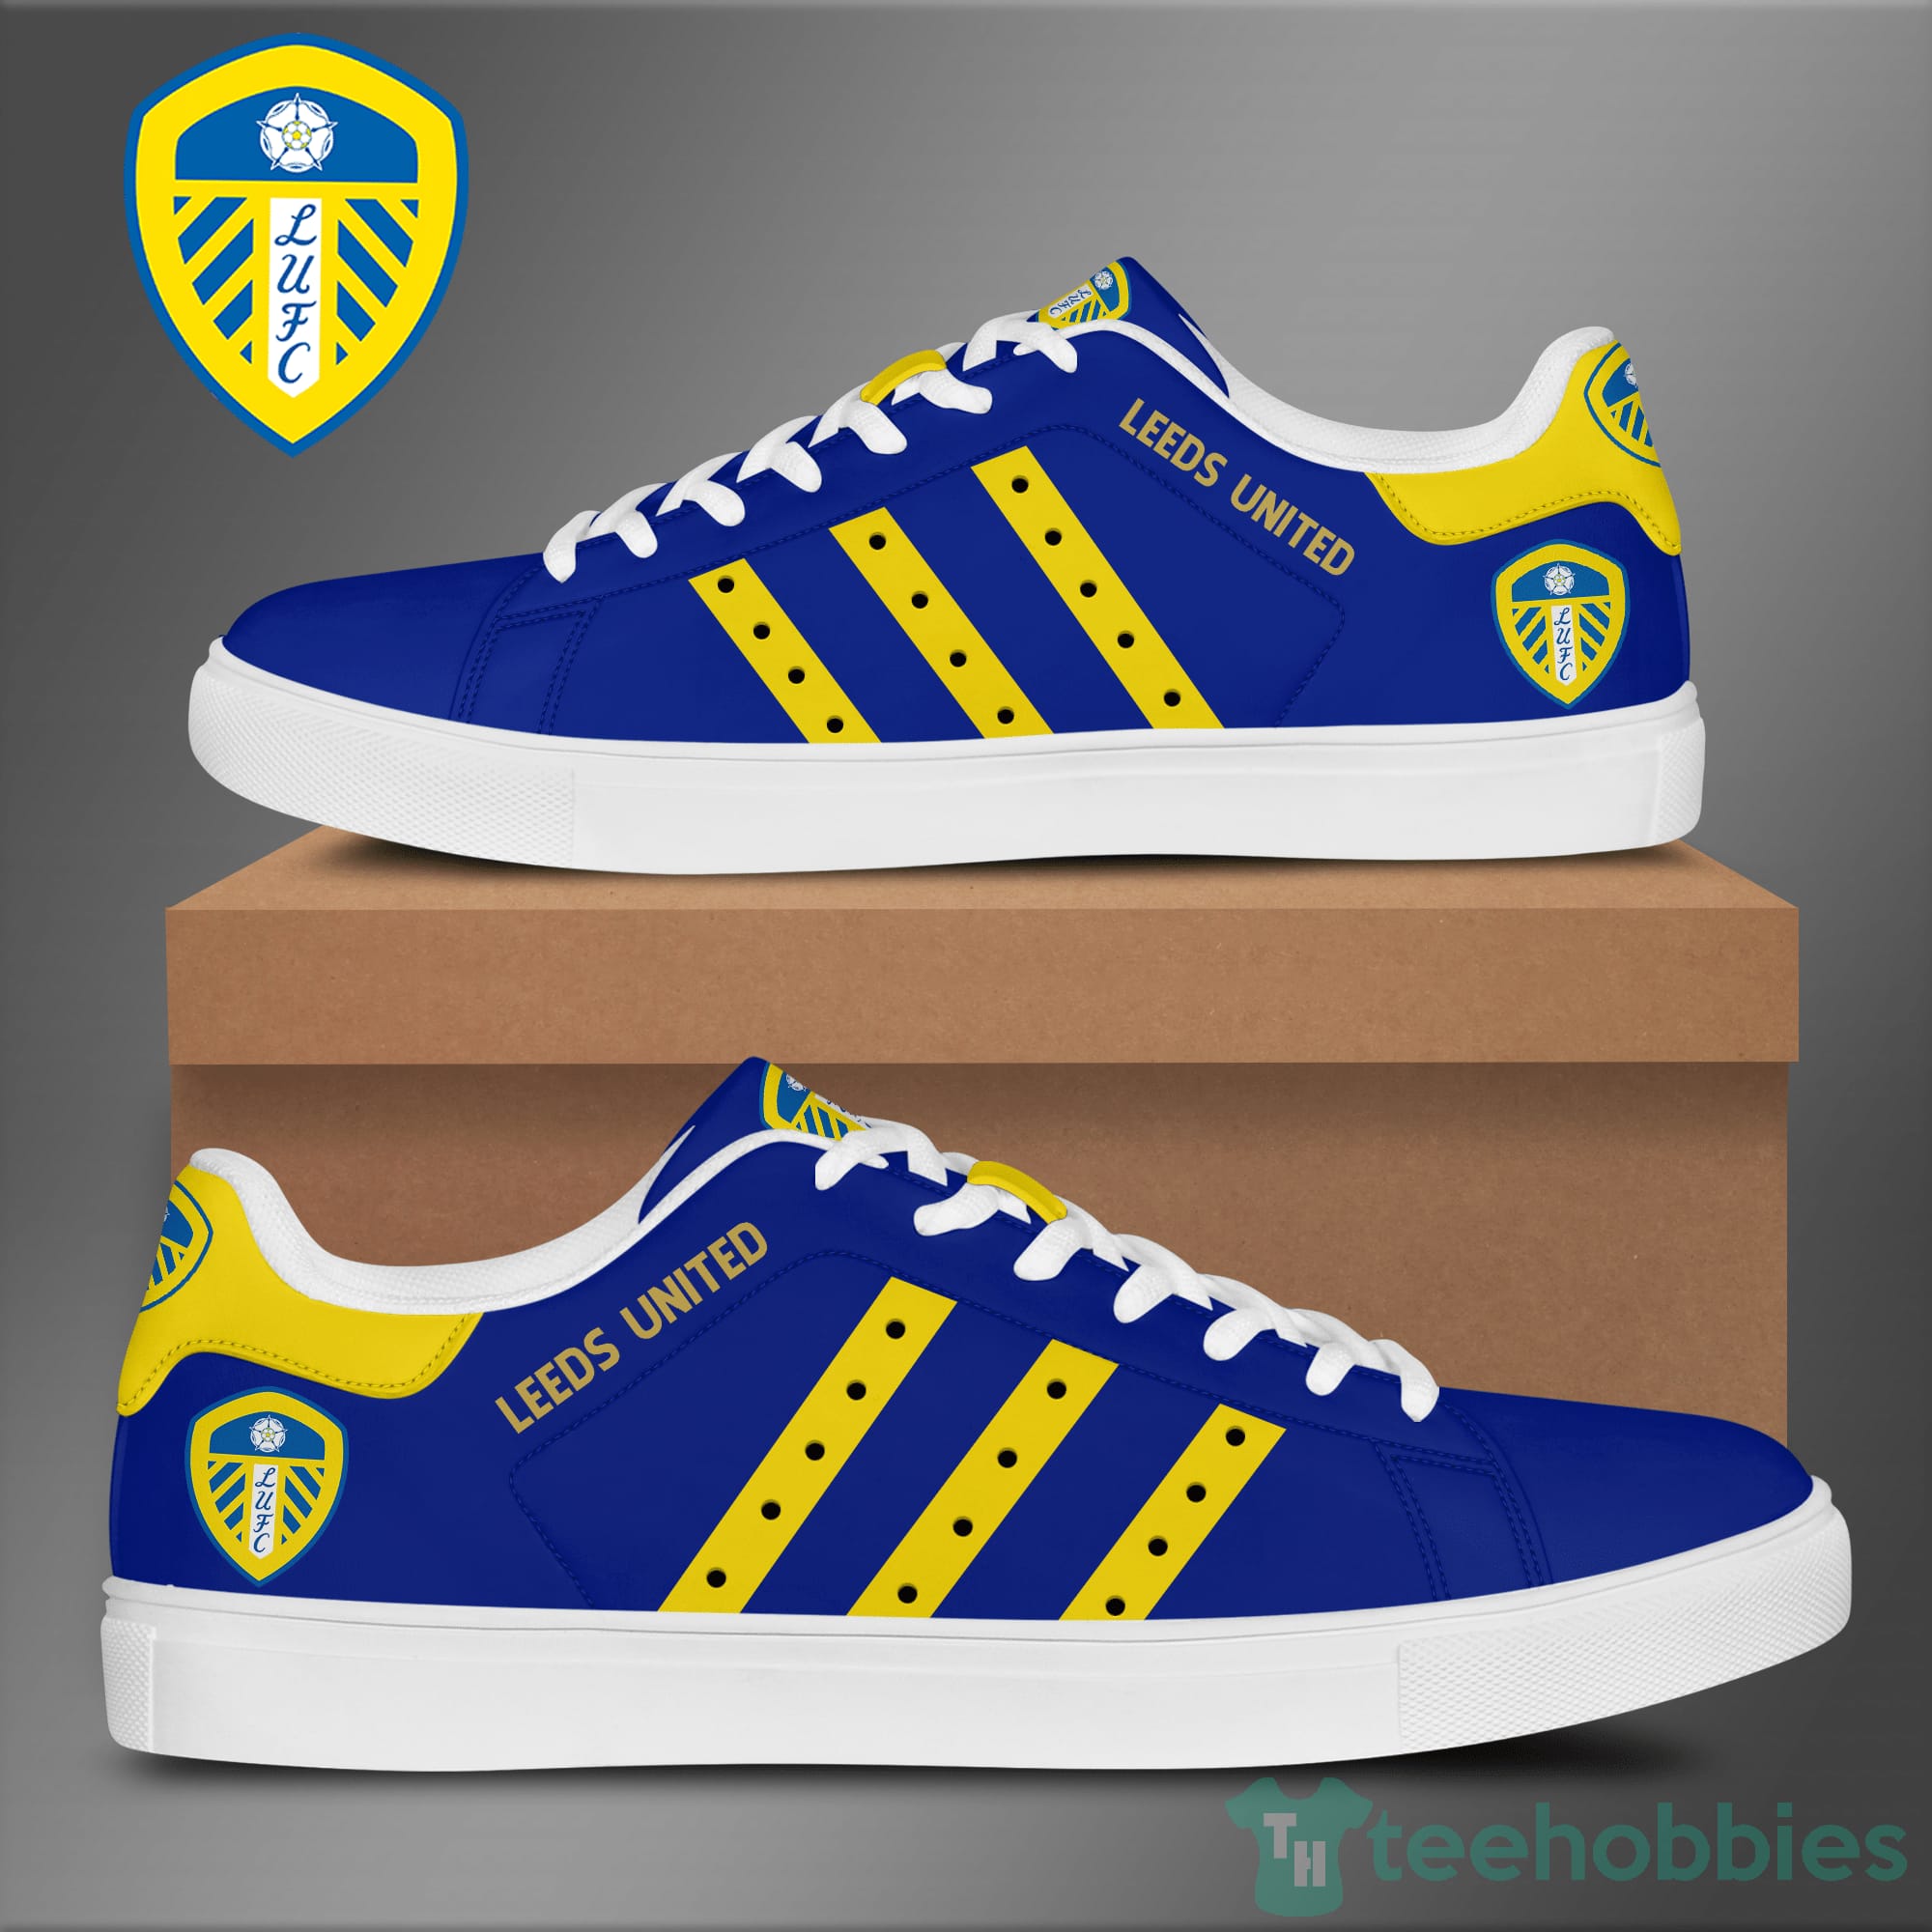 Leeds United Low Top Skate Shoes Product photo 1